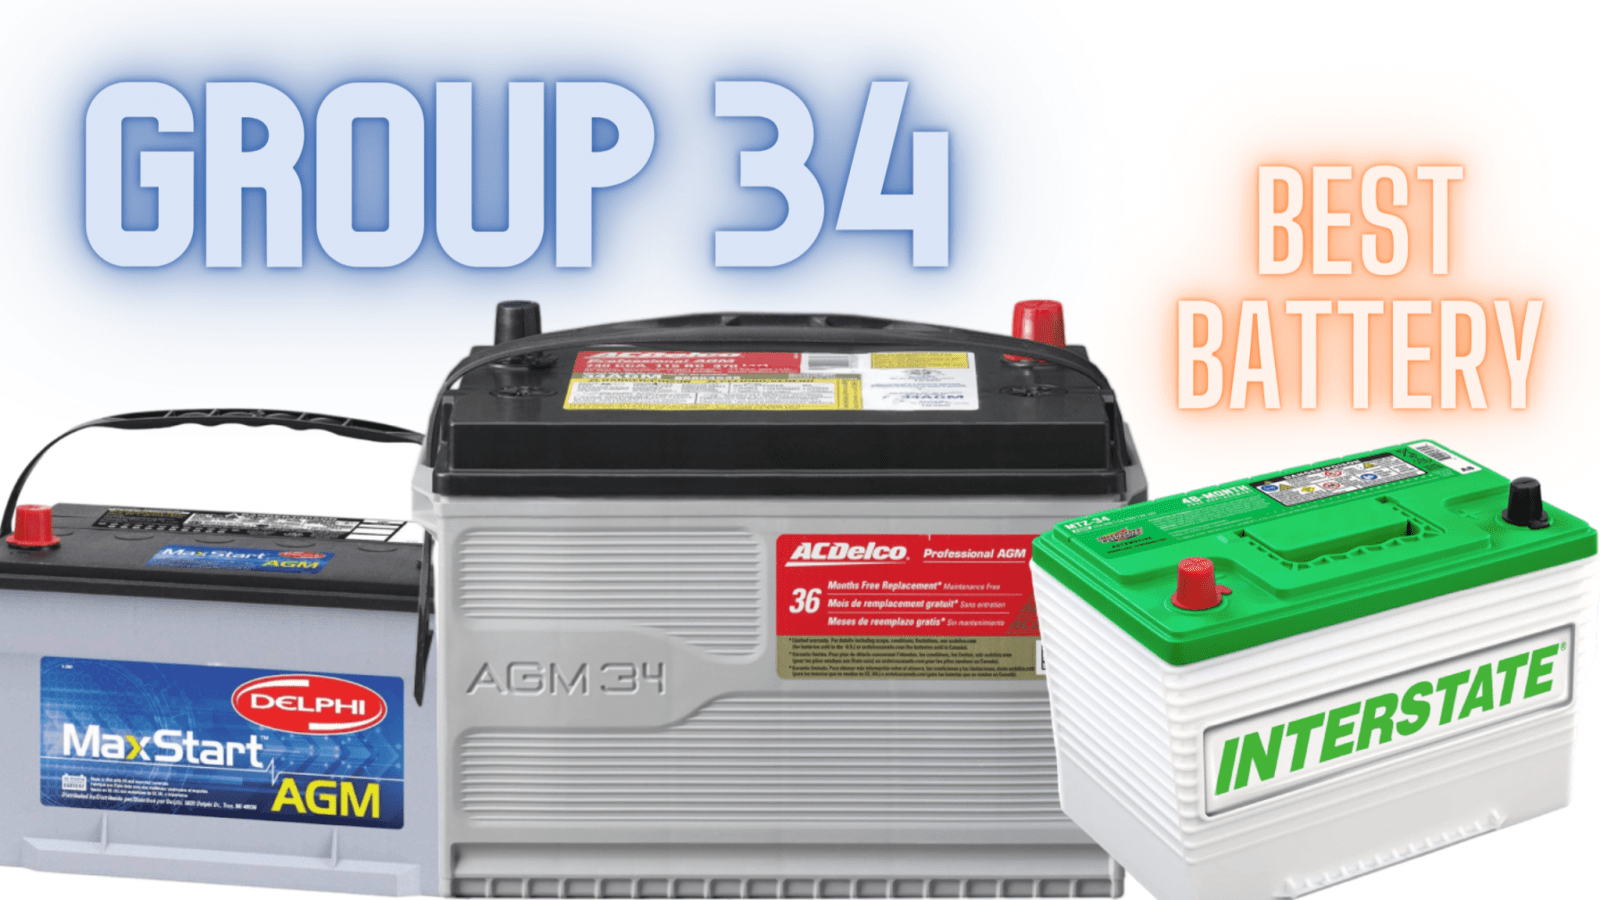 Best battery for cold weather: Our TOP 4 Choices!